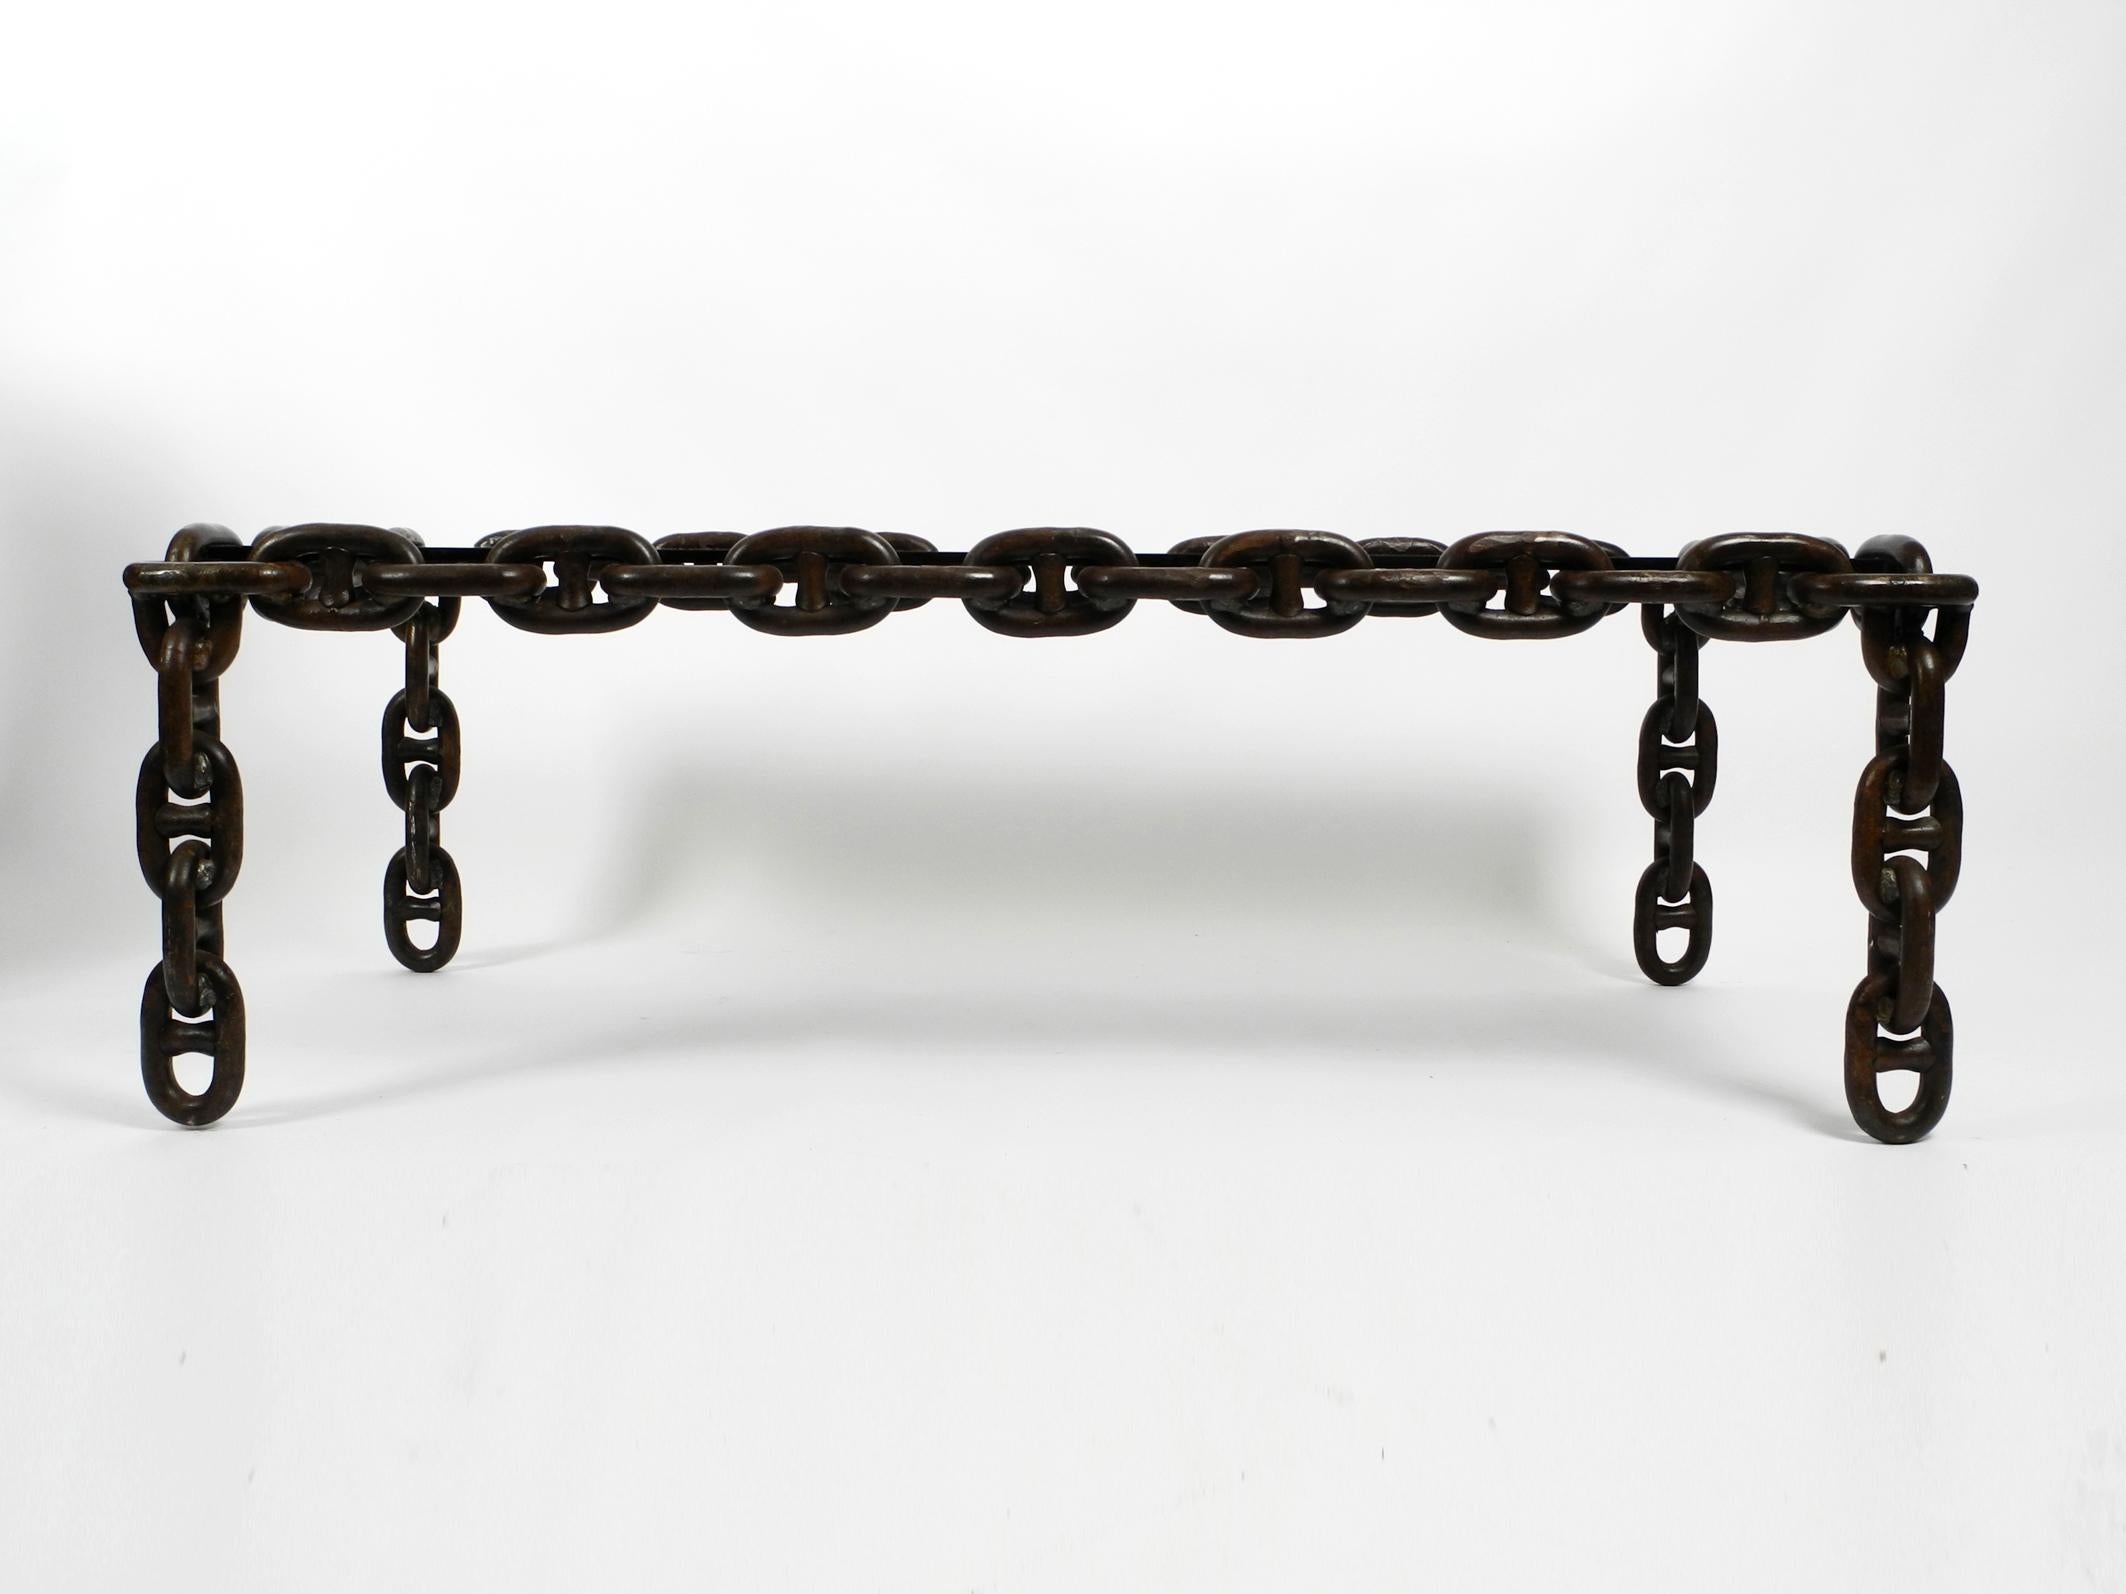 Wonderful, very rare and heavy coffee table made of large rust-brown lacquered nautical iron chains.
Above is a polished, thick smoked glass plate in mint condition.
Great brutalist design from the 1970s. Manufacturer unknown.
Very solid, high